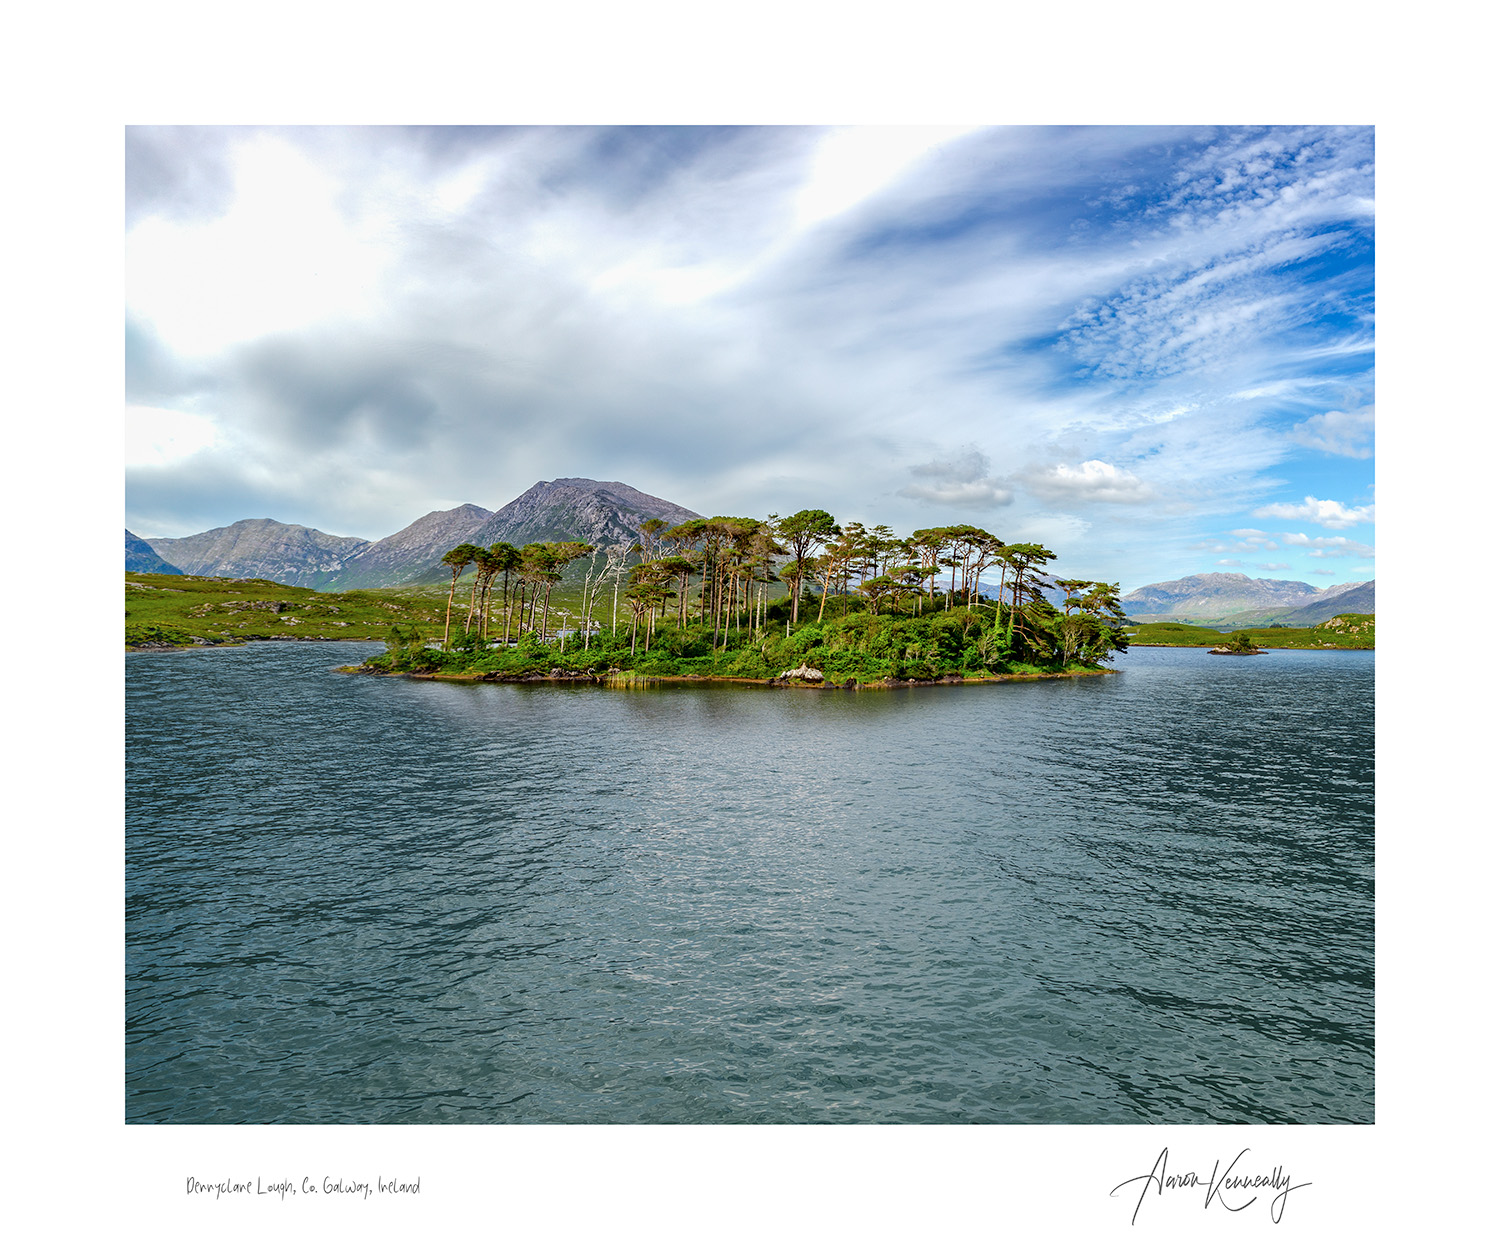 Derryclare Lough, Co. Galway